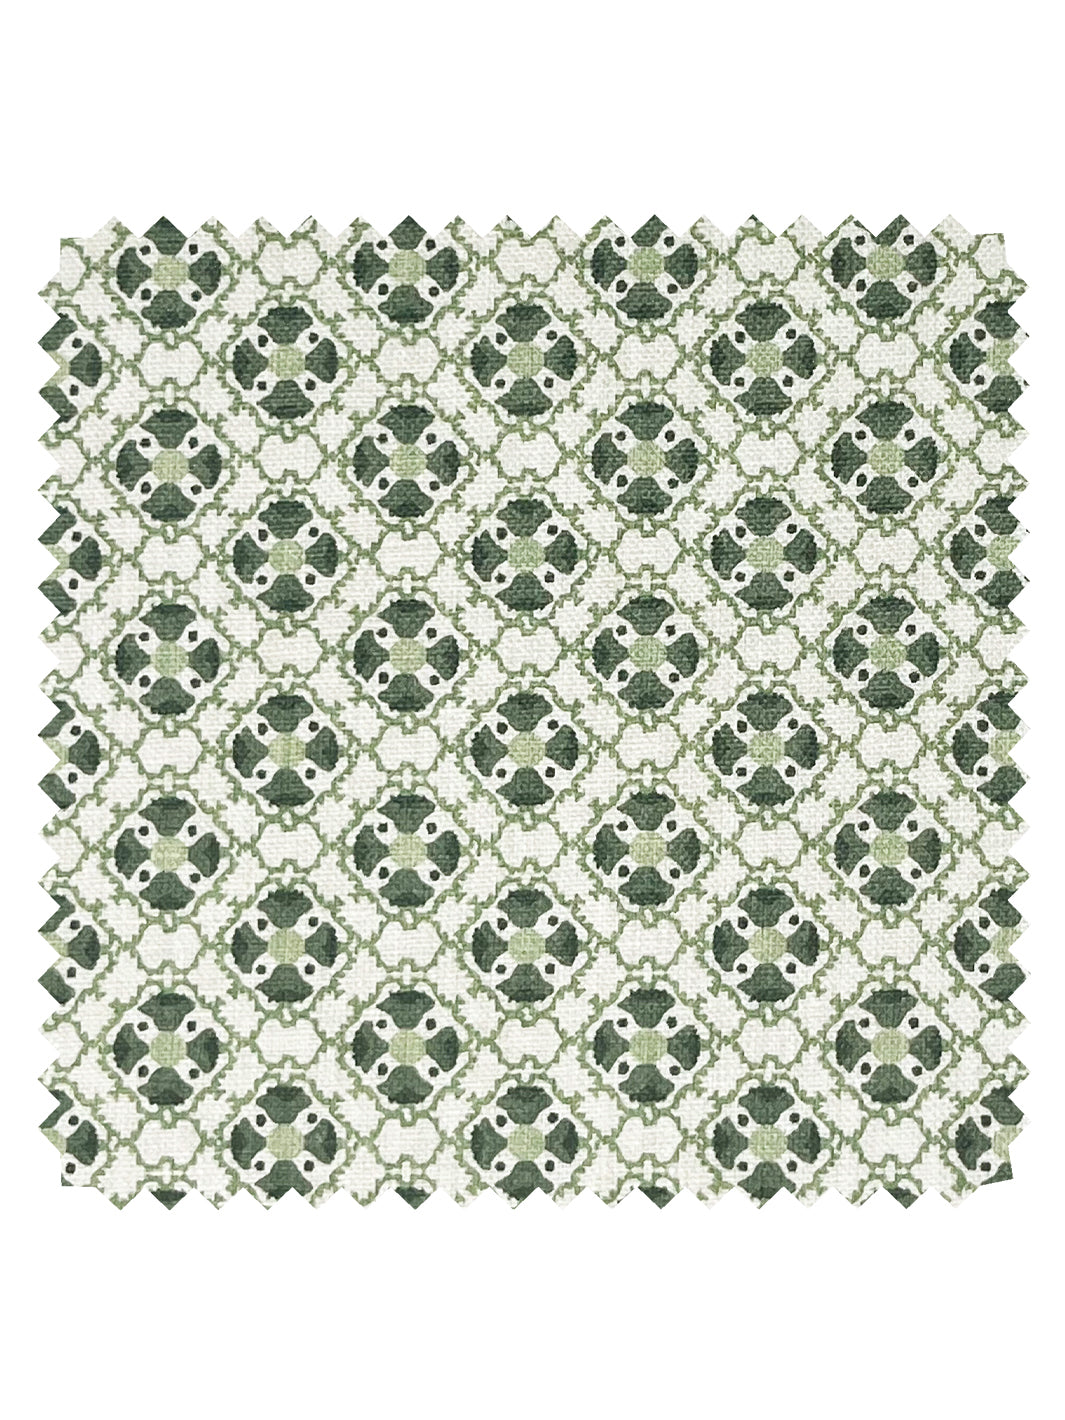 'Medallion All Over' Linen Fabric by Nathan Turner - Green